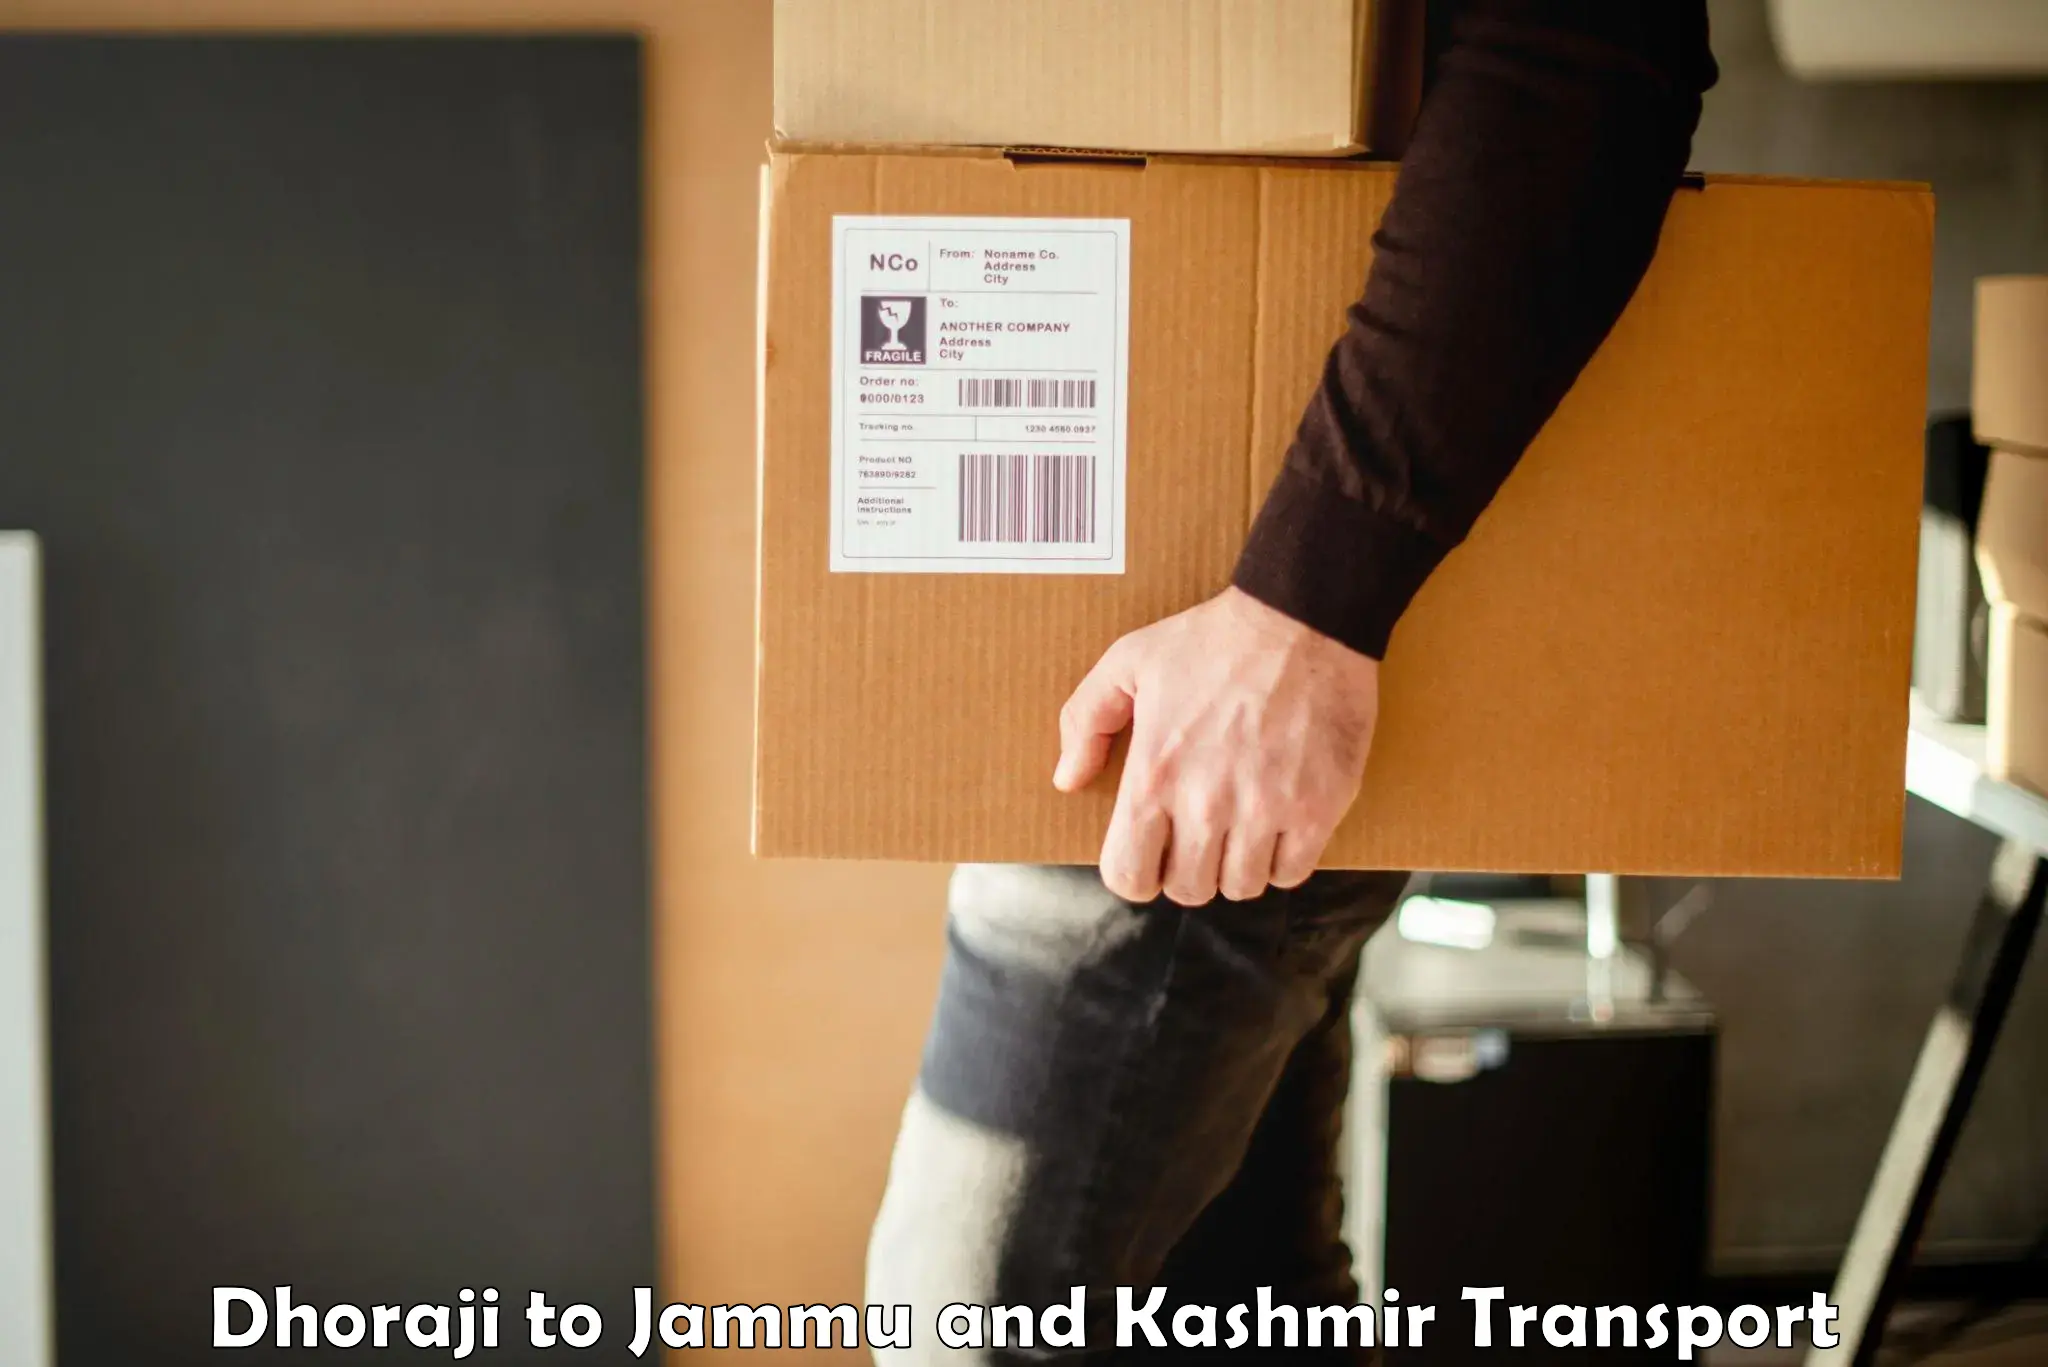 Truck transport companies in India Dhoraji to Jakh